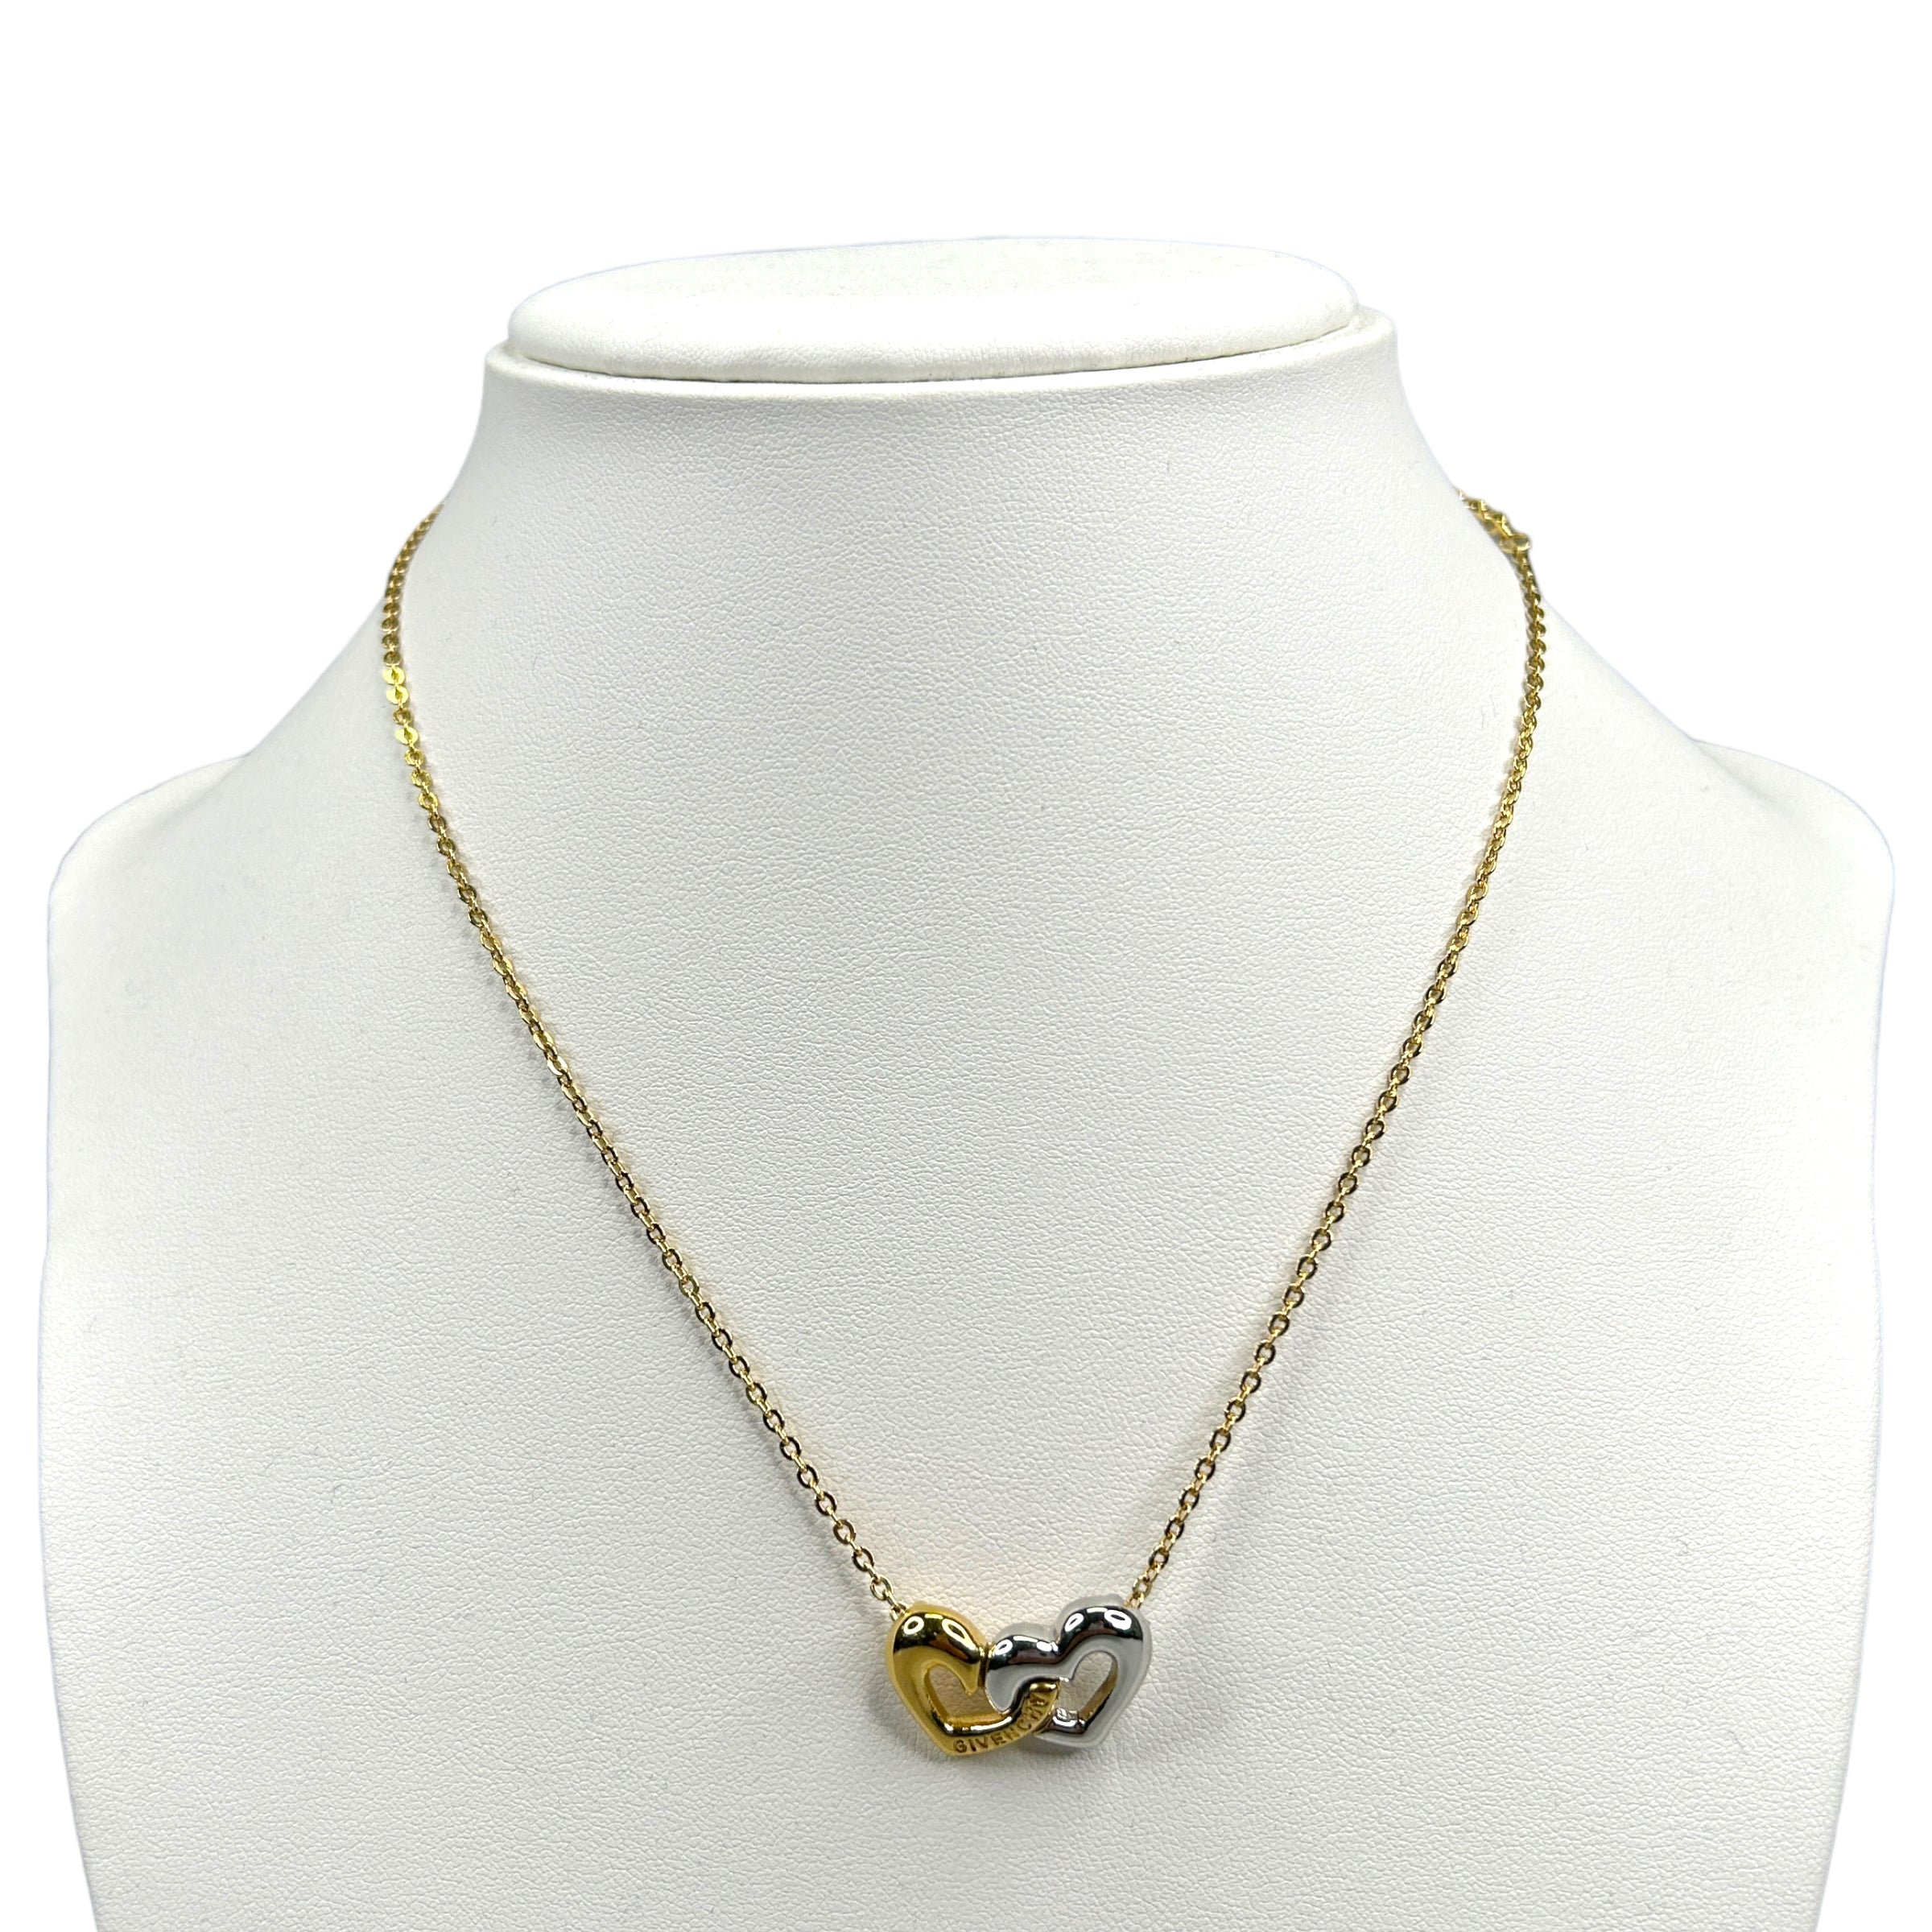 GIVENCHY INTERLOCKING SILVER/GOLD HEART PENDANT NECKLACE GOLD PLATED